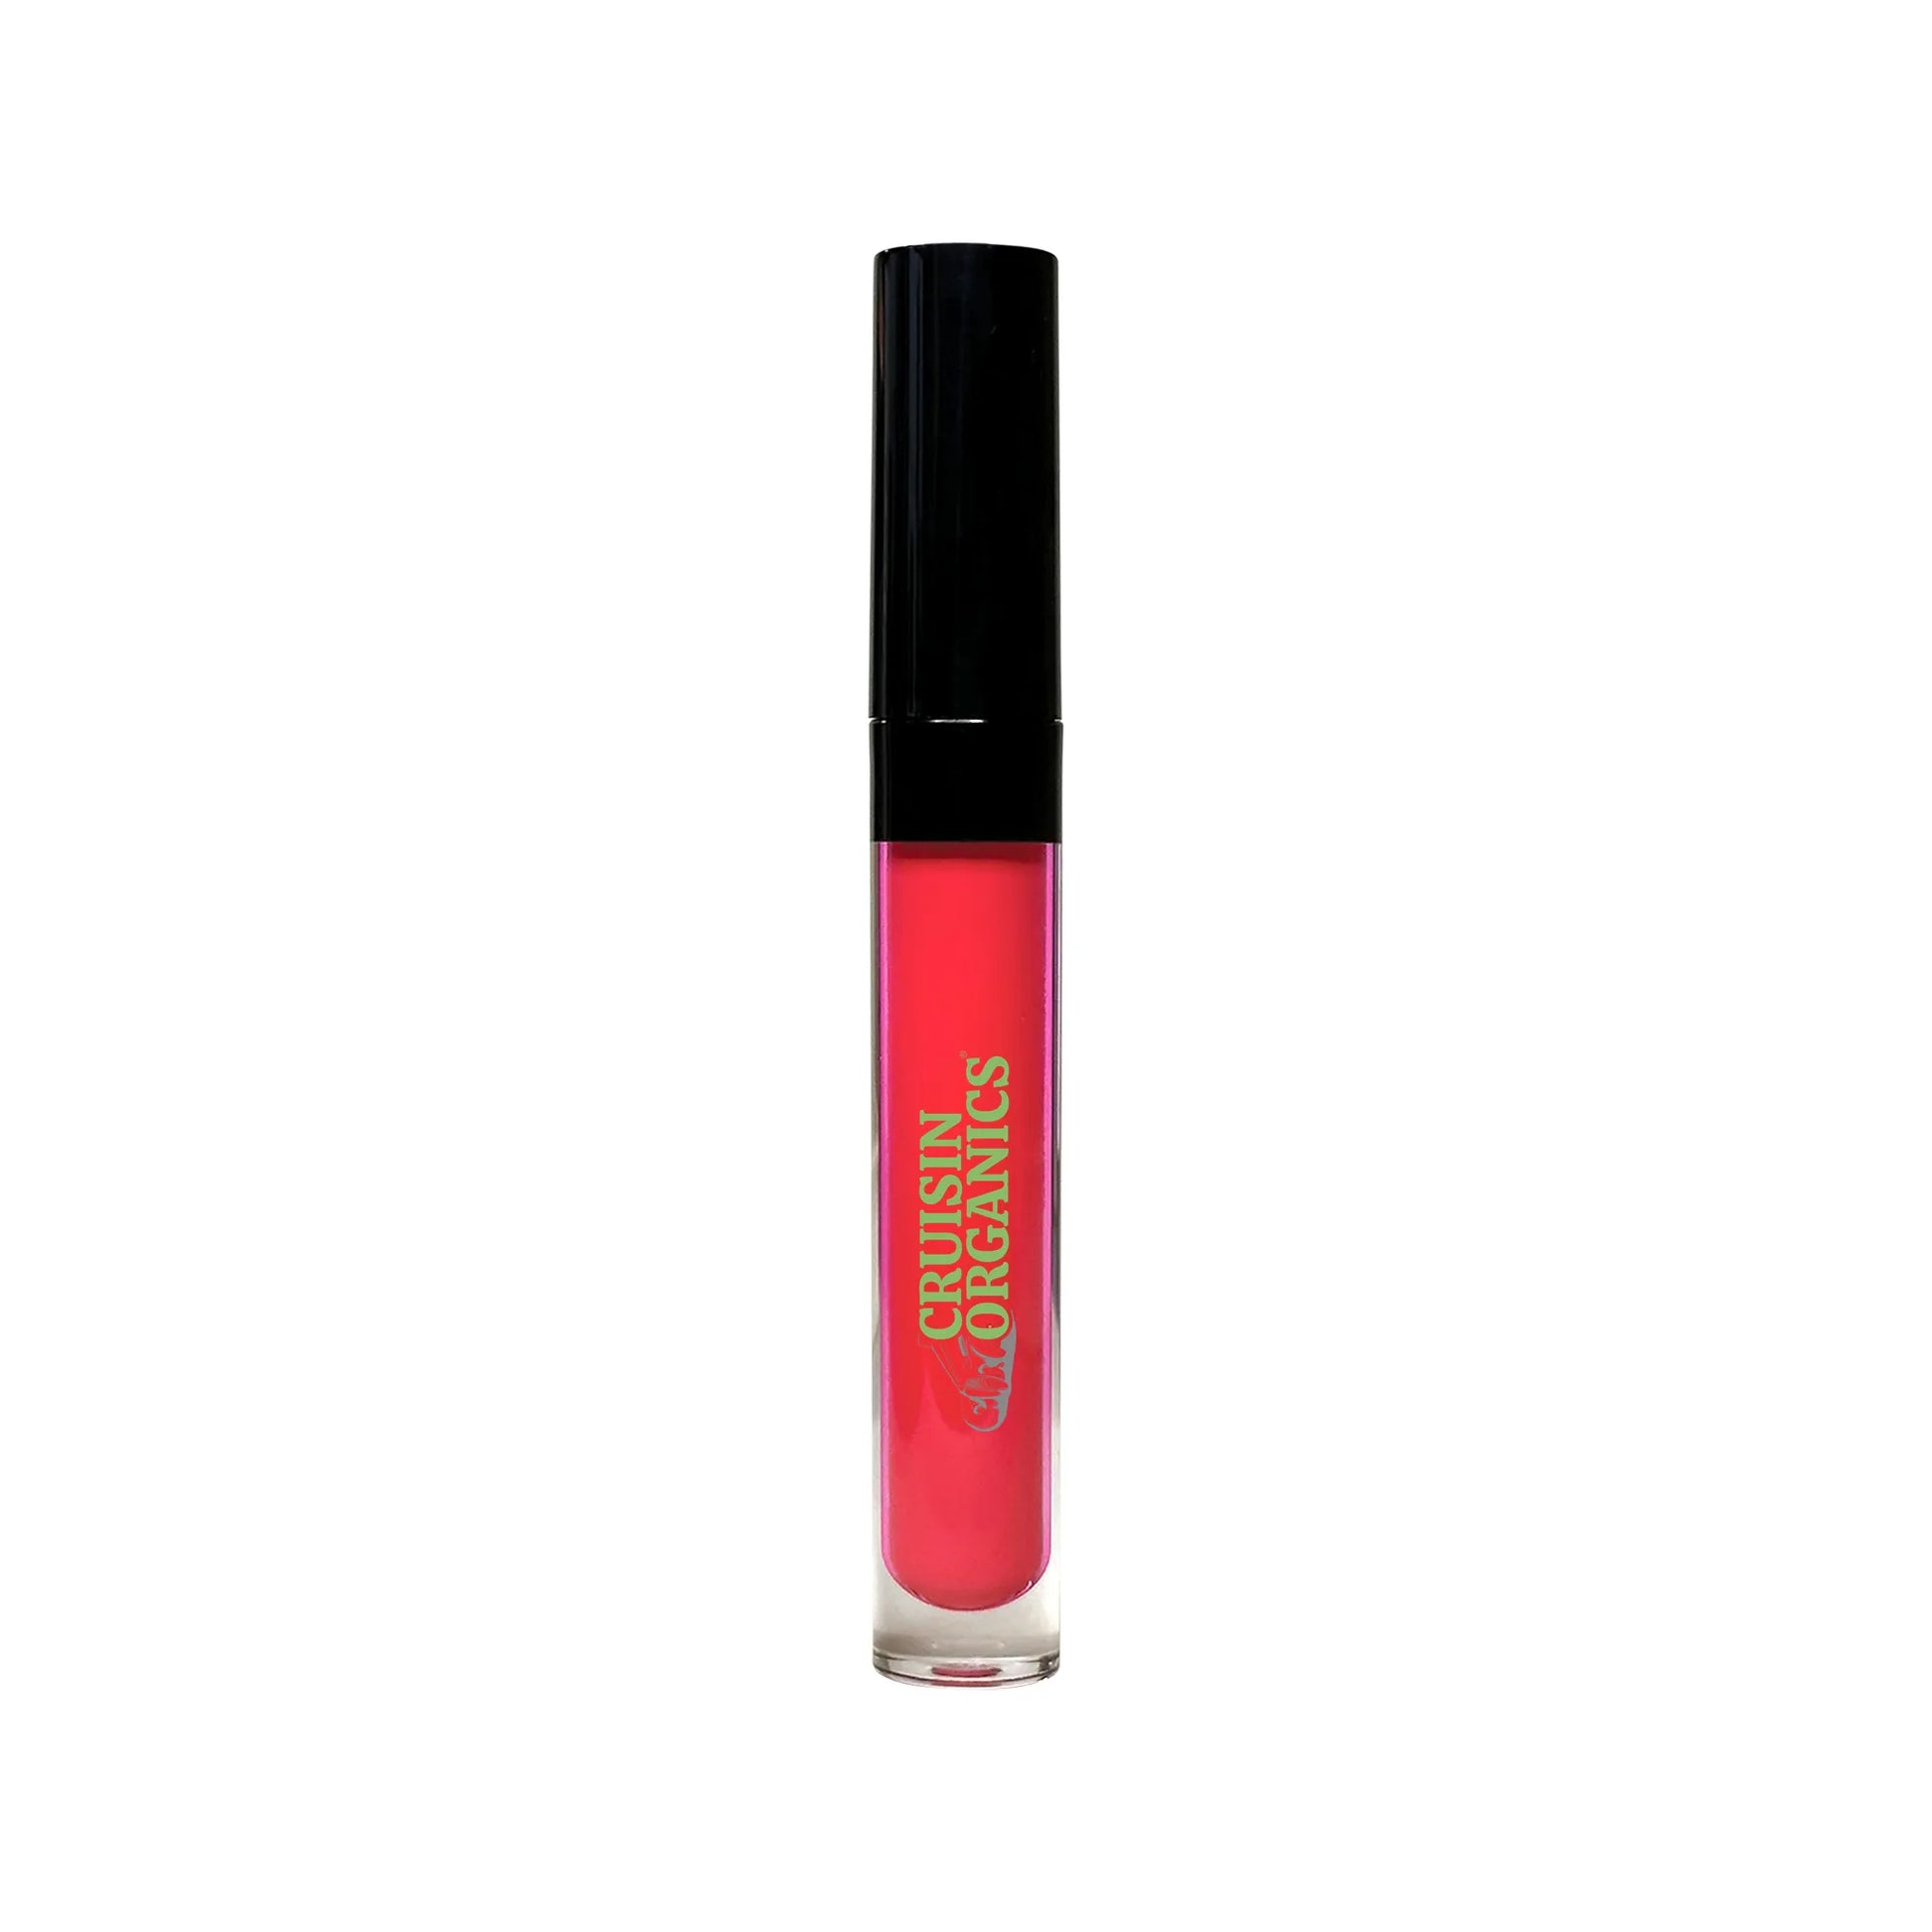 Introducing the Cruisin Organics Liquid to Matte Lipstick—an embodiment of the most trendy colors accompanied by comfortable all-day wear that conveniently fits in your back pocket. Immerse yourself in the realm of highly pigmented shades, perfect for any occasion. Liquid to Matte Lipstick features a slanted doe applicator that guarantees hassle-free application, ensuring the Liquid to Matte Lipstick glides on effortlessly. Enhanced scent you'll eagerly anticipate your next application.